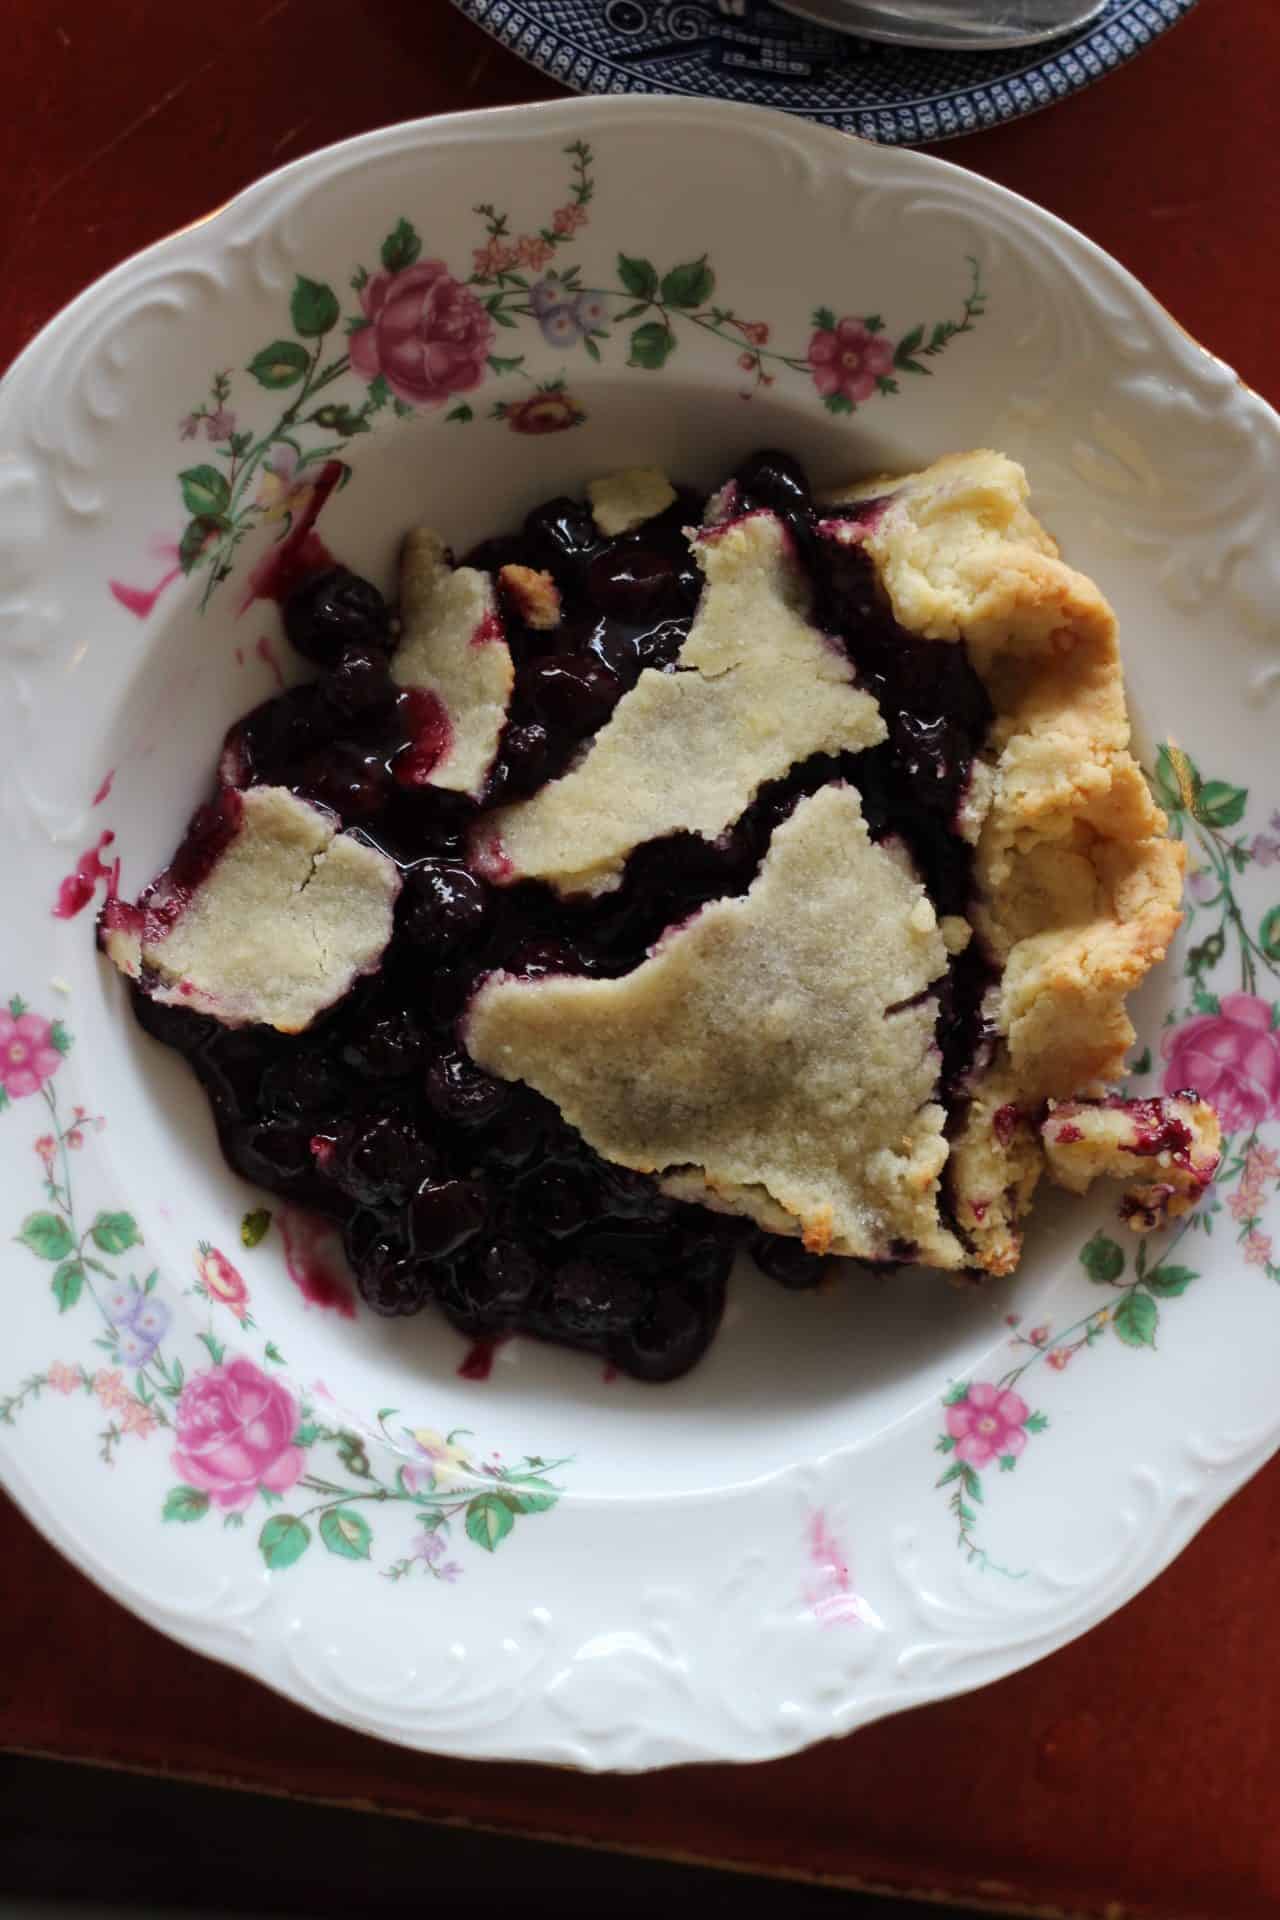 Cozy up with a slice of the best pie in Portland, whether you're into cherry, chocolate, or key lime. We've rounded up our favorites here!